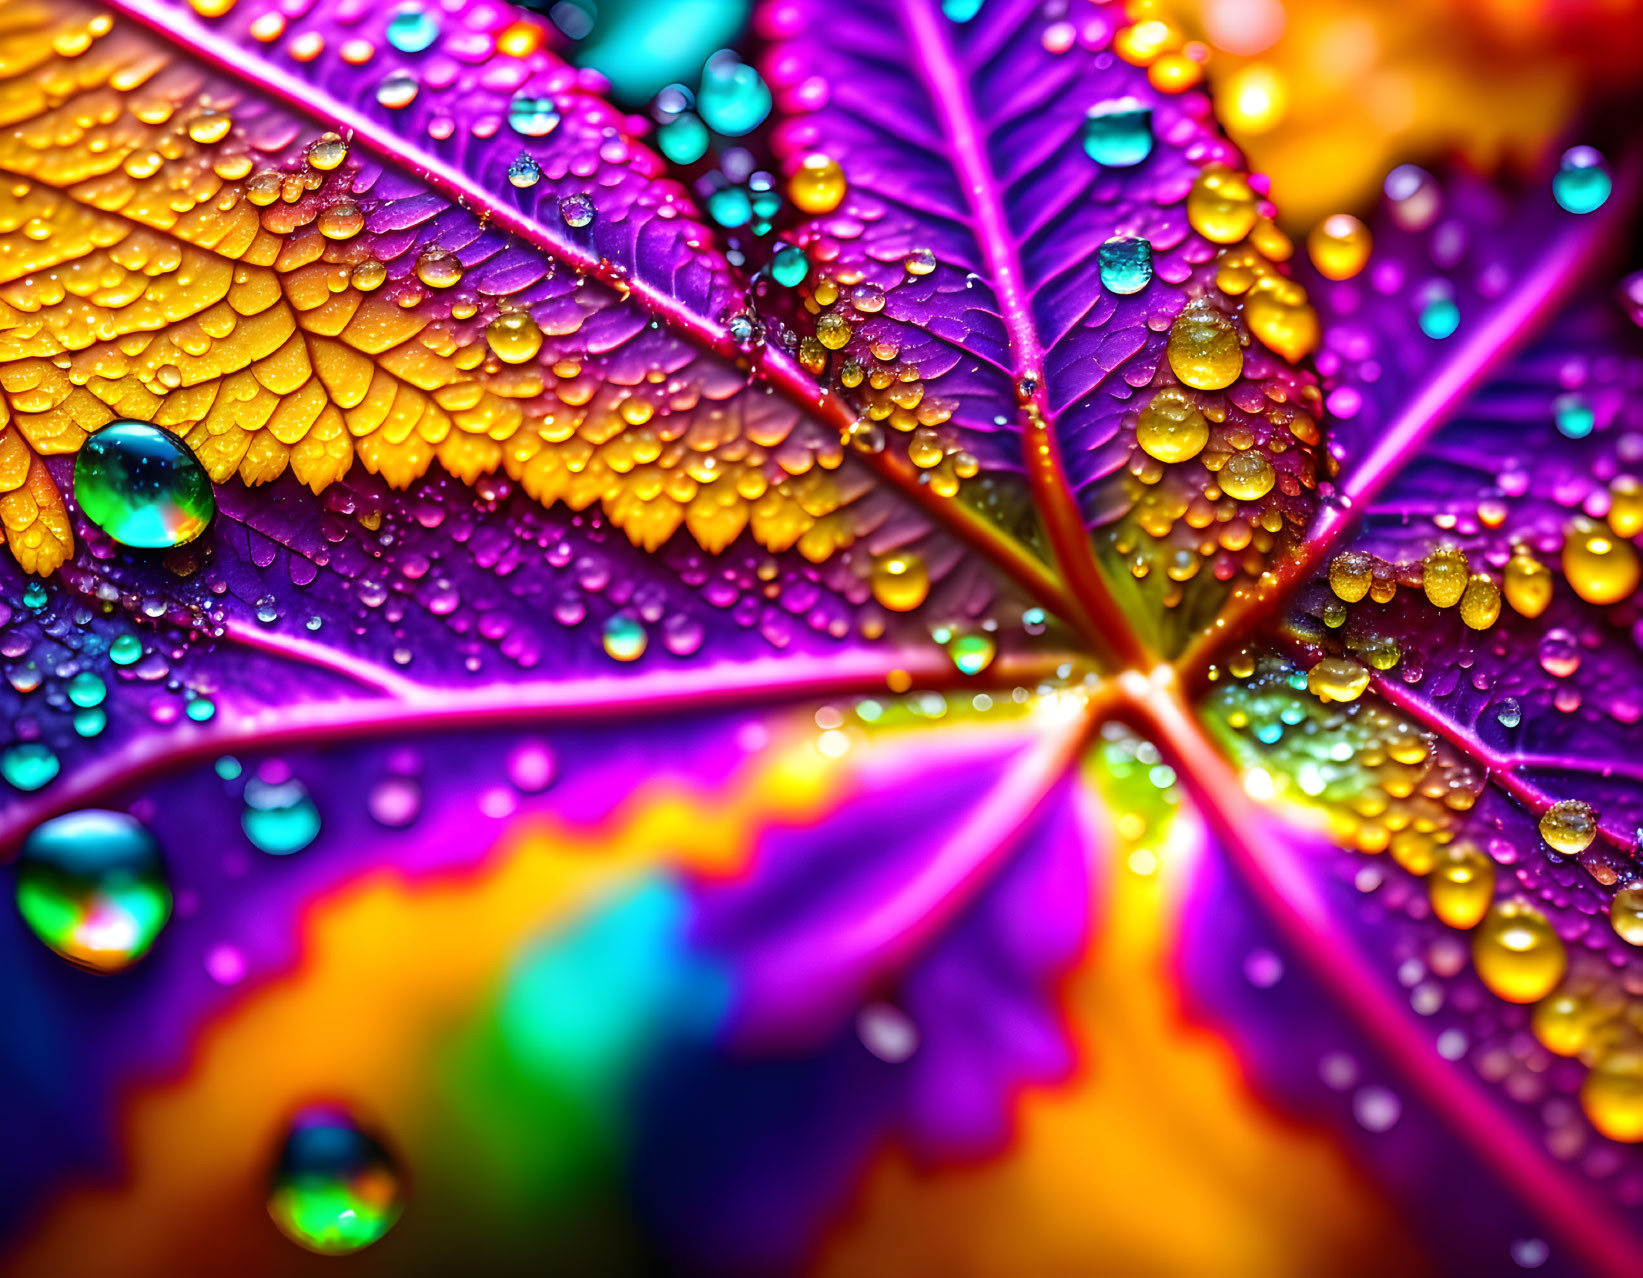 Colorful leaf with glistening water droplets under bright light